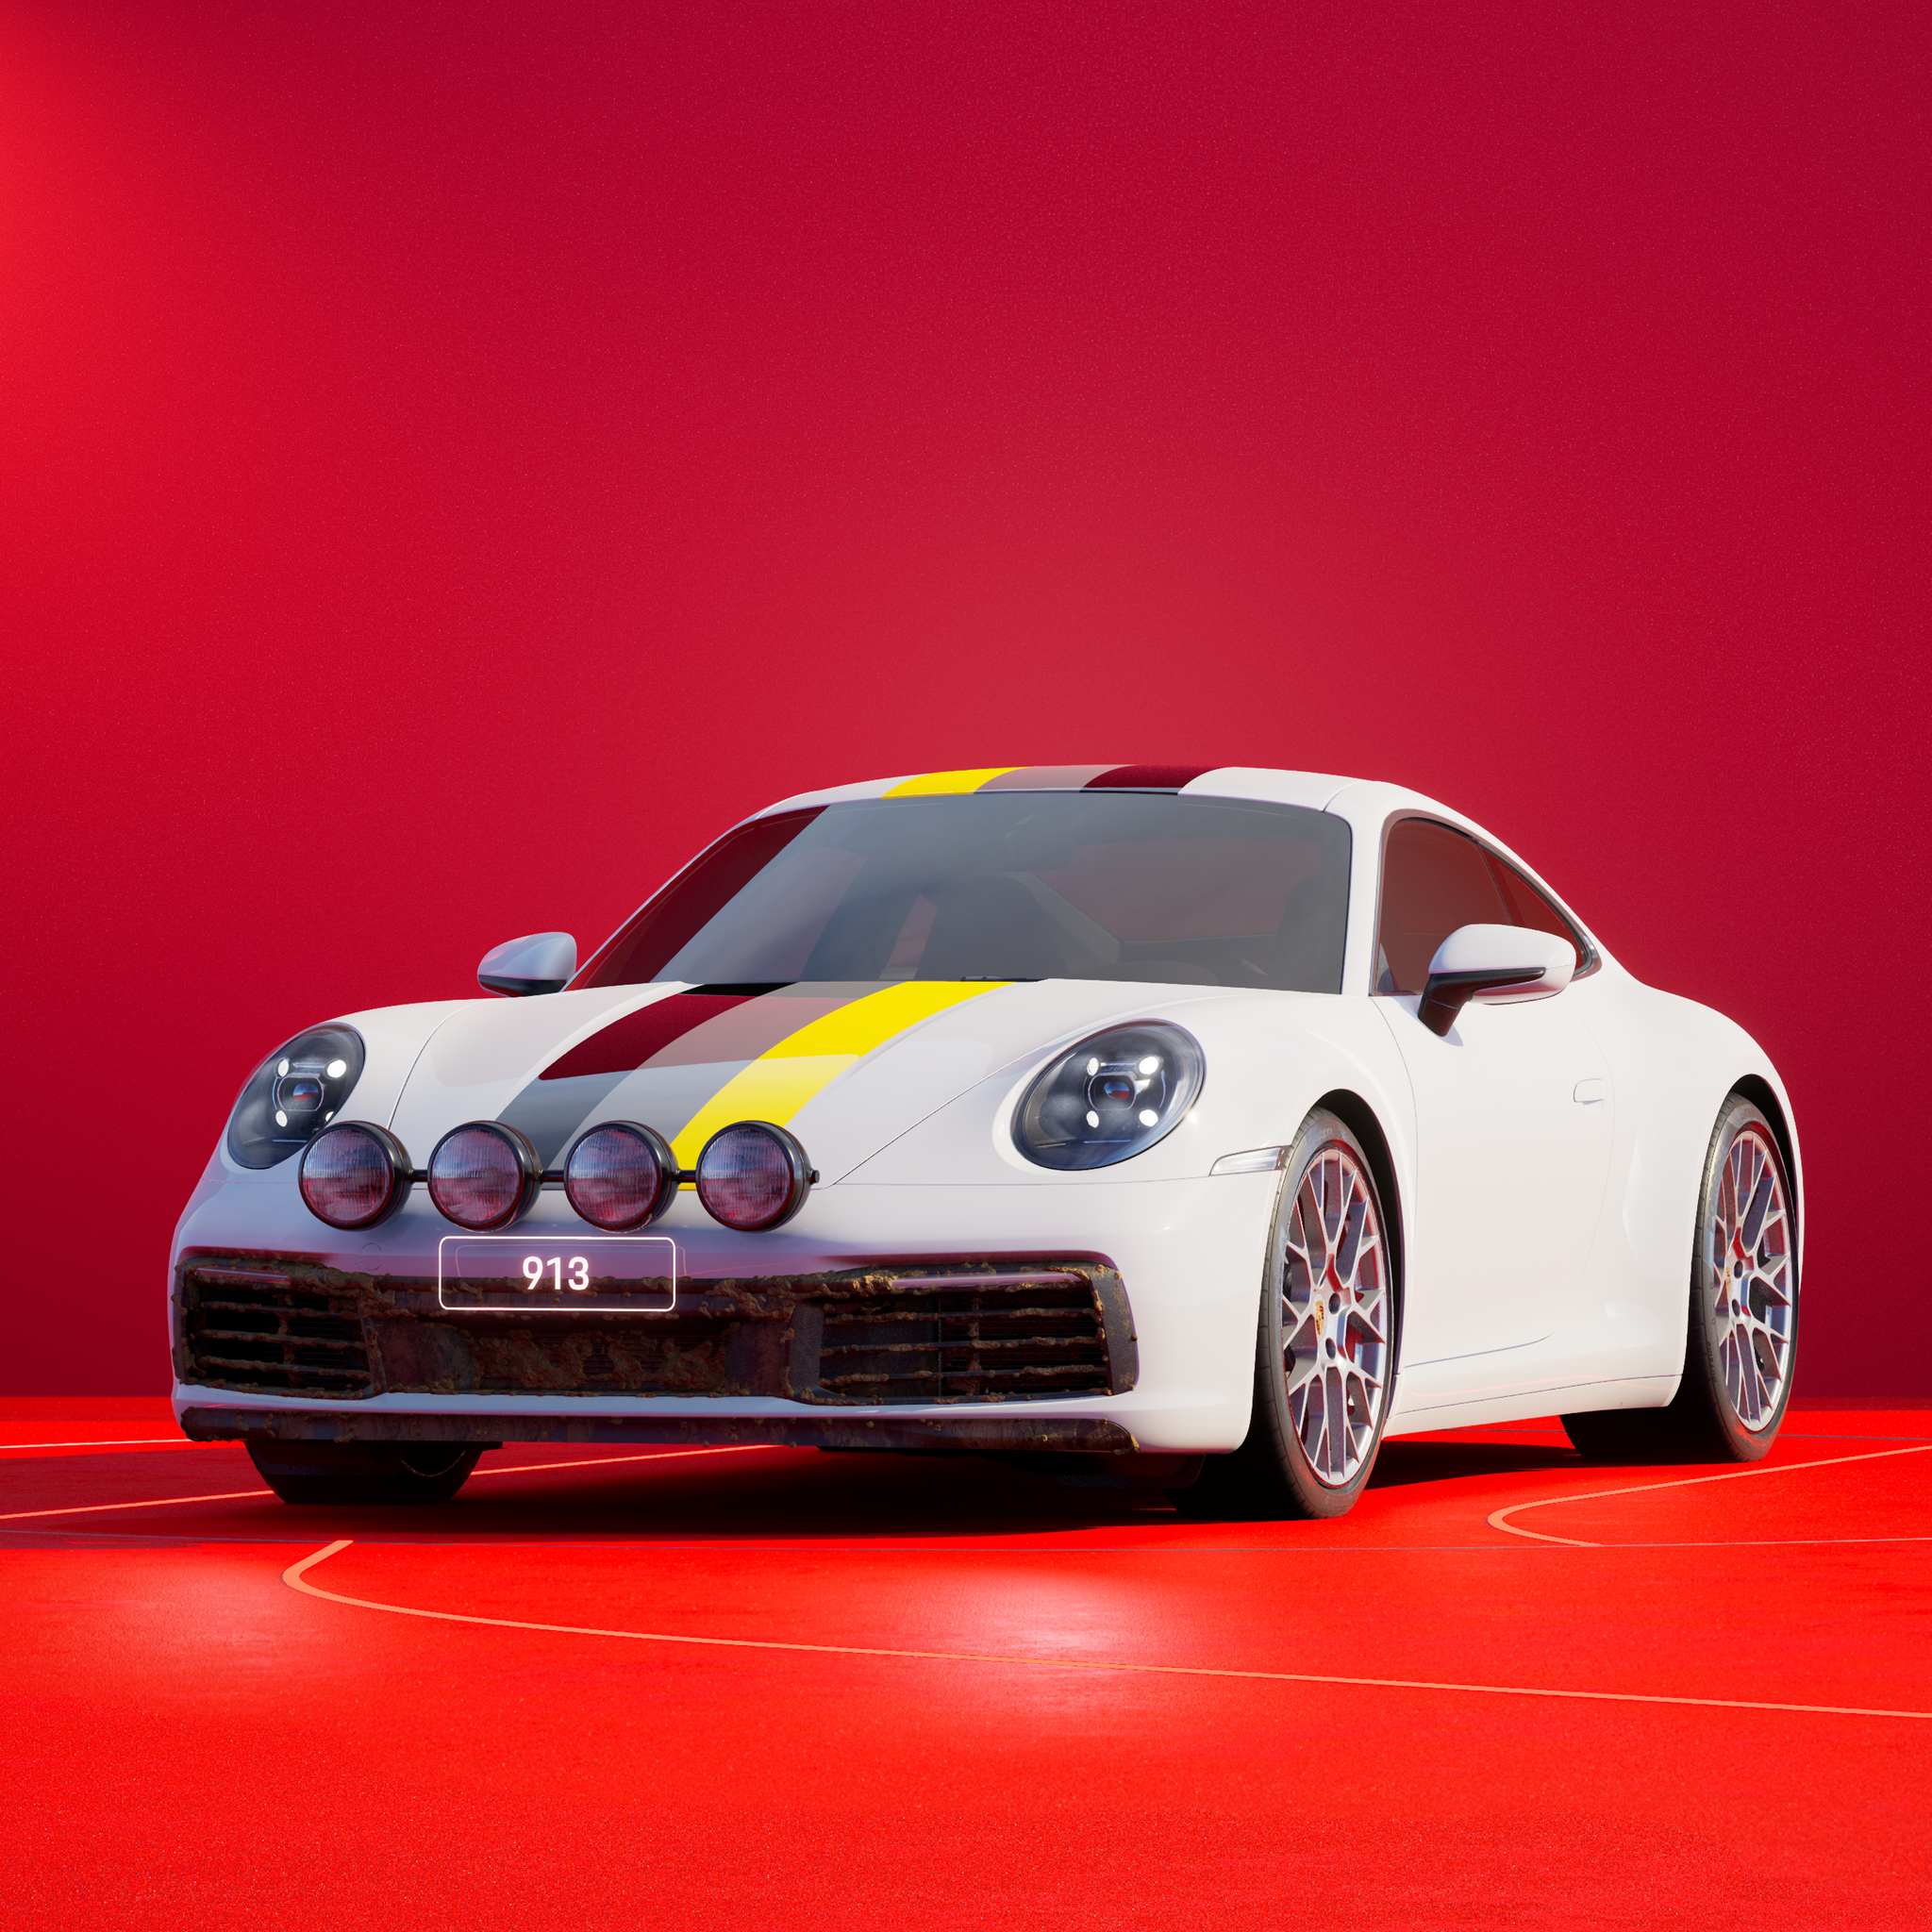 The PORSCHΞ 911 913 image in phase